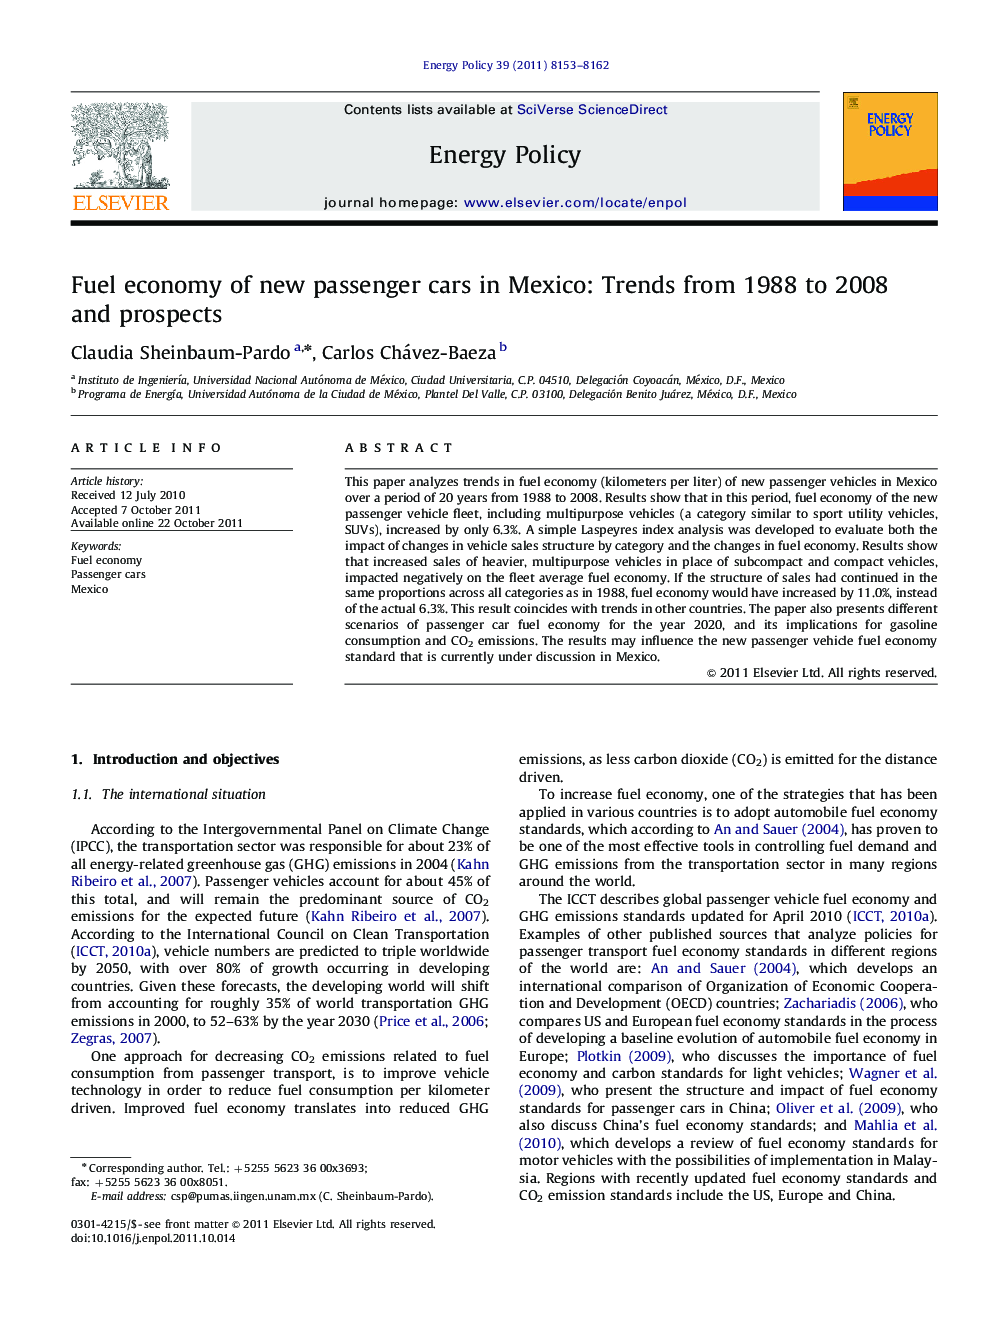 Fuel economy of new passenger cars in Mexico: Trends from 1988 to 2008 and prospects